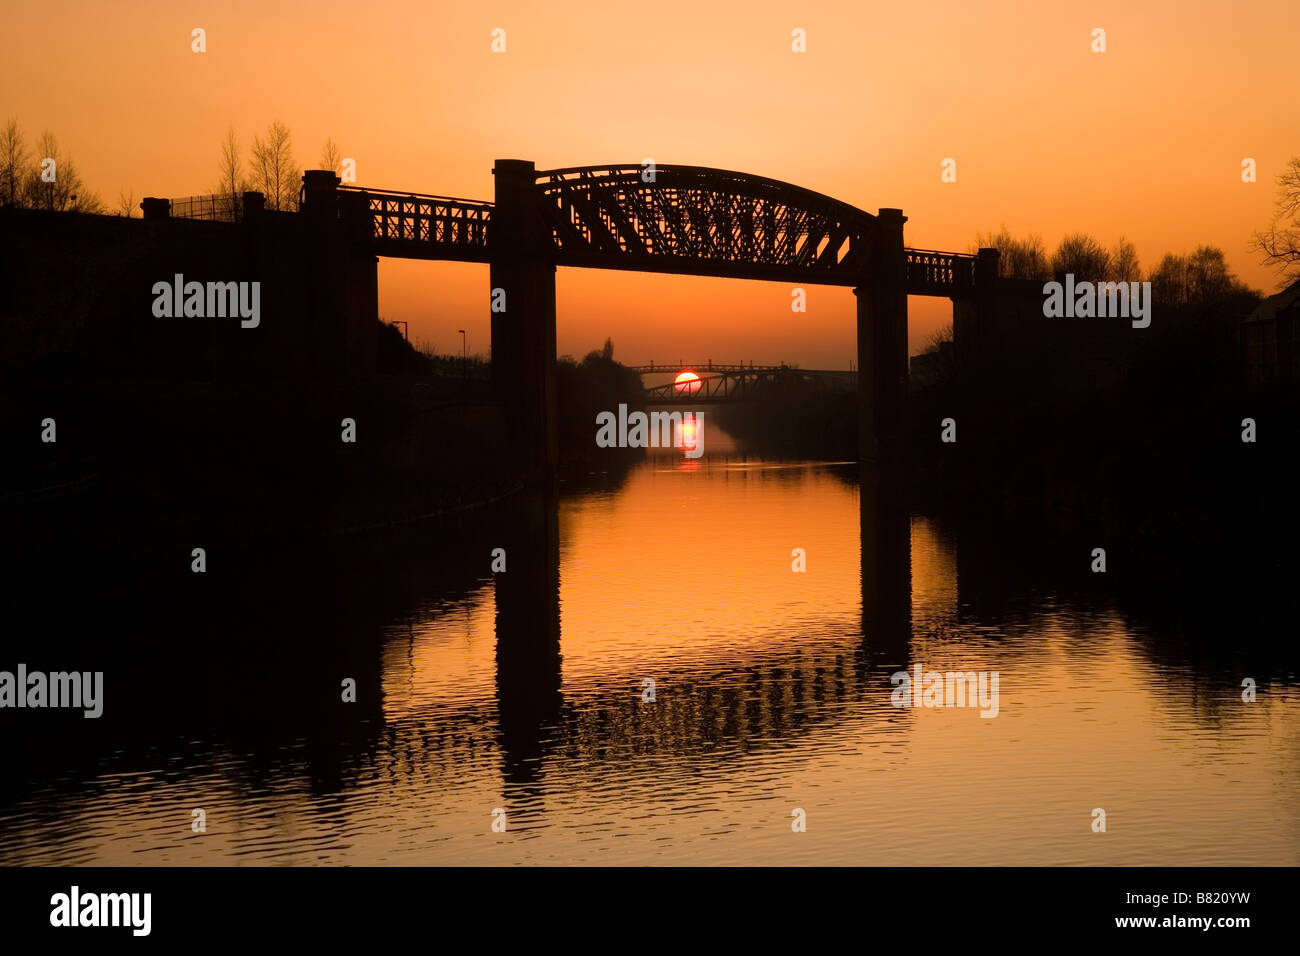 Manchester Ship Canal at sunset with Latchford Railway Viaduct in foreground, Warrington, Cheshire, England, UK, Europe Stock Photo